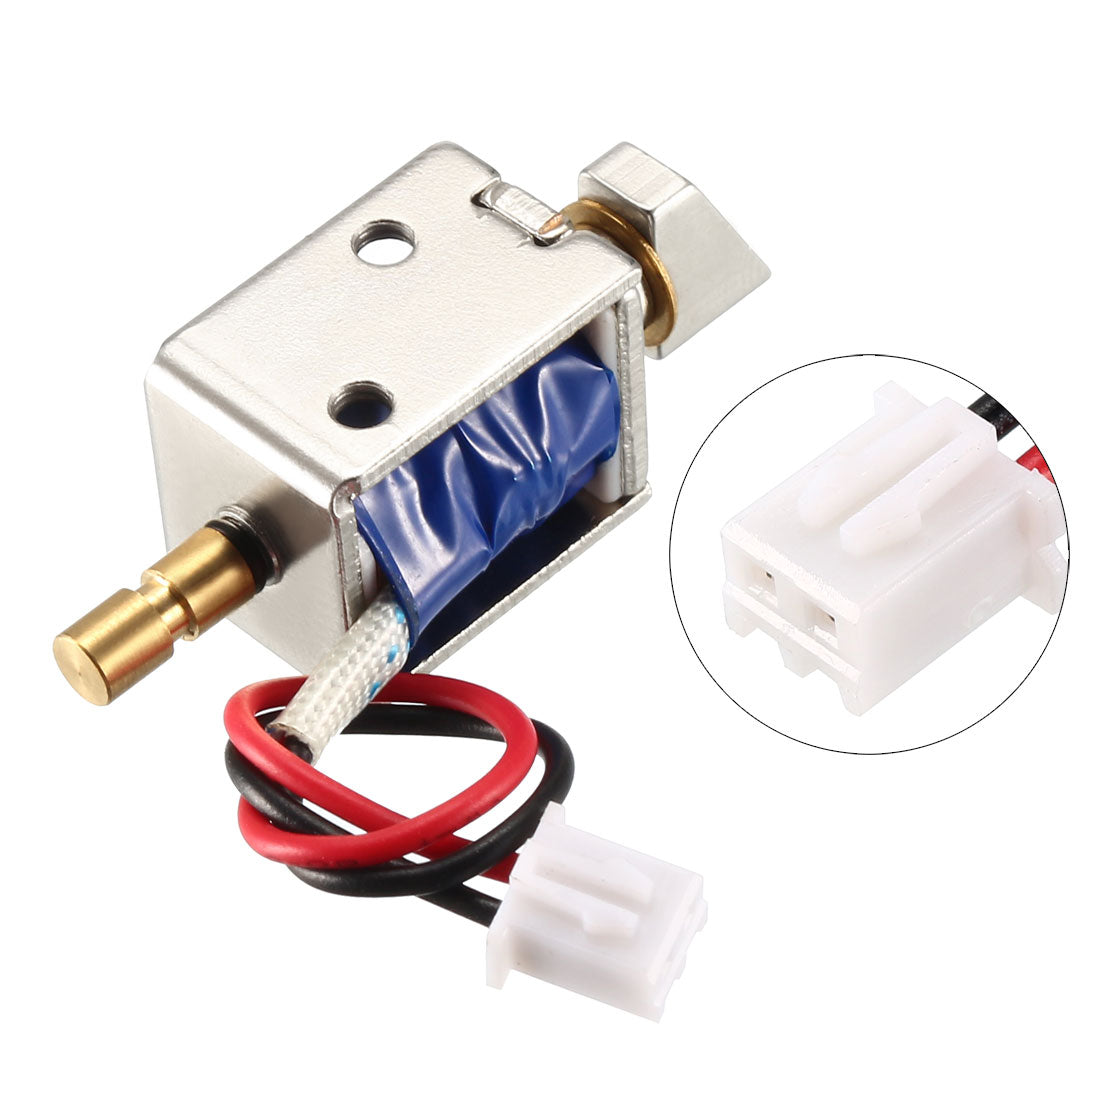 uxcell Uxcell DC 12V 0.43A 4mm Mini Electromagnetic Solenoid Lock Assembly for Electirc Door Lock